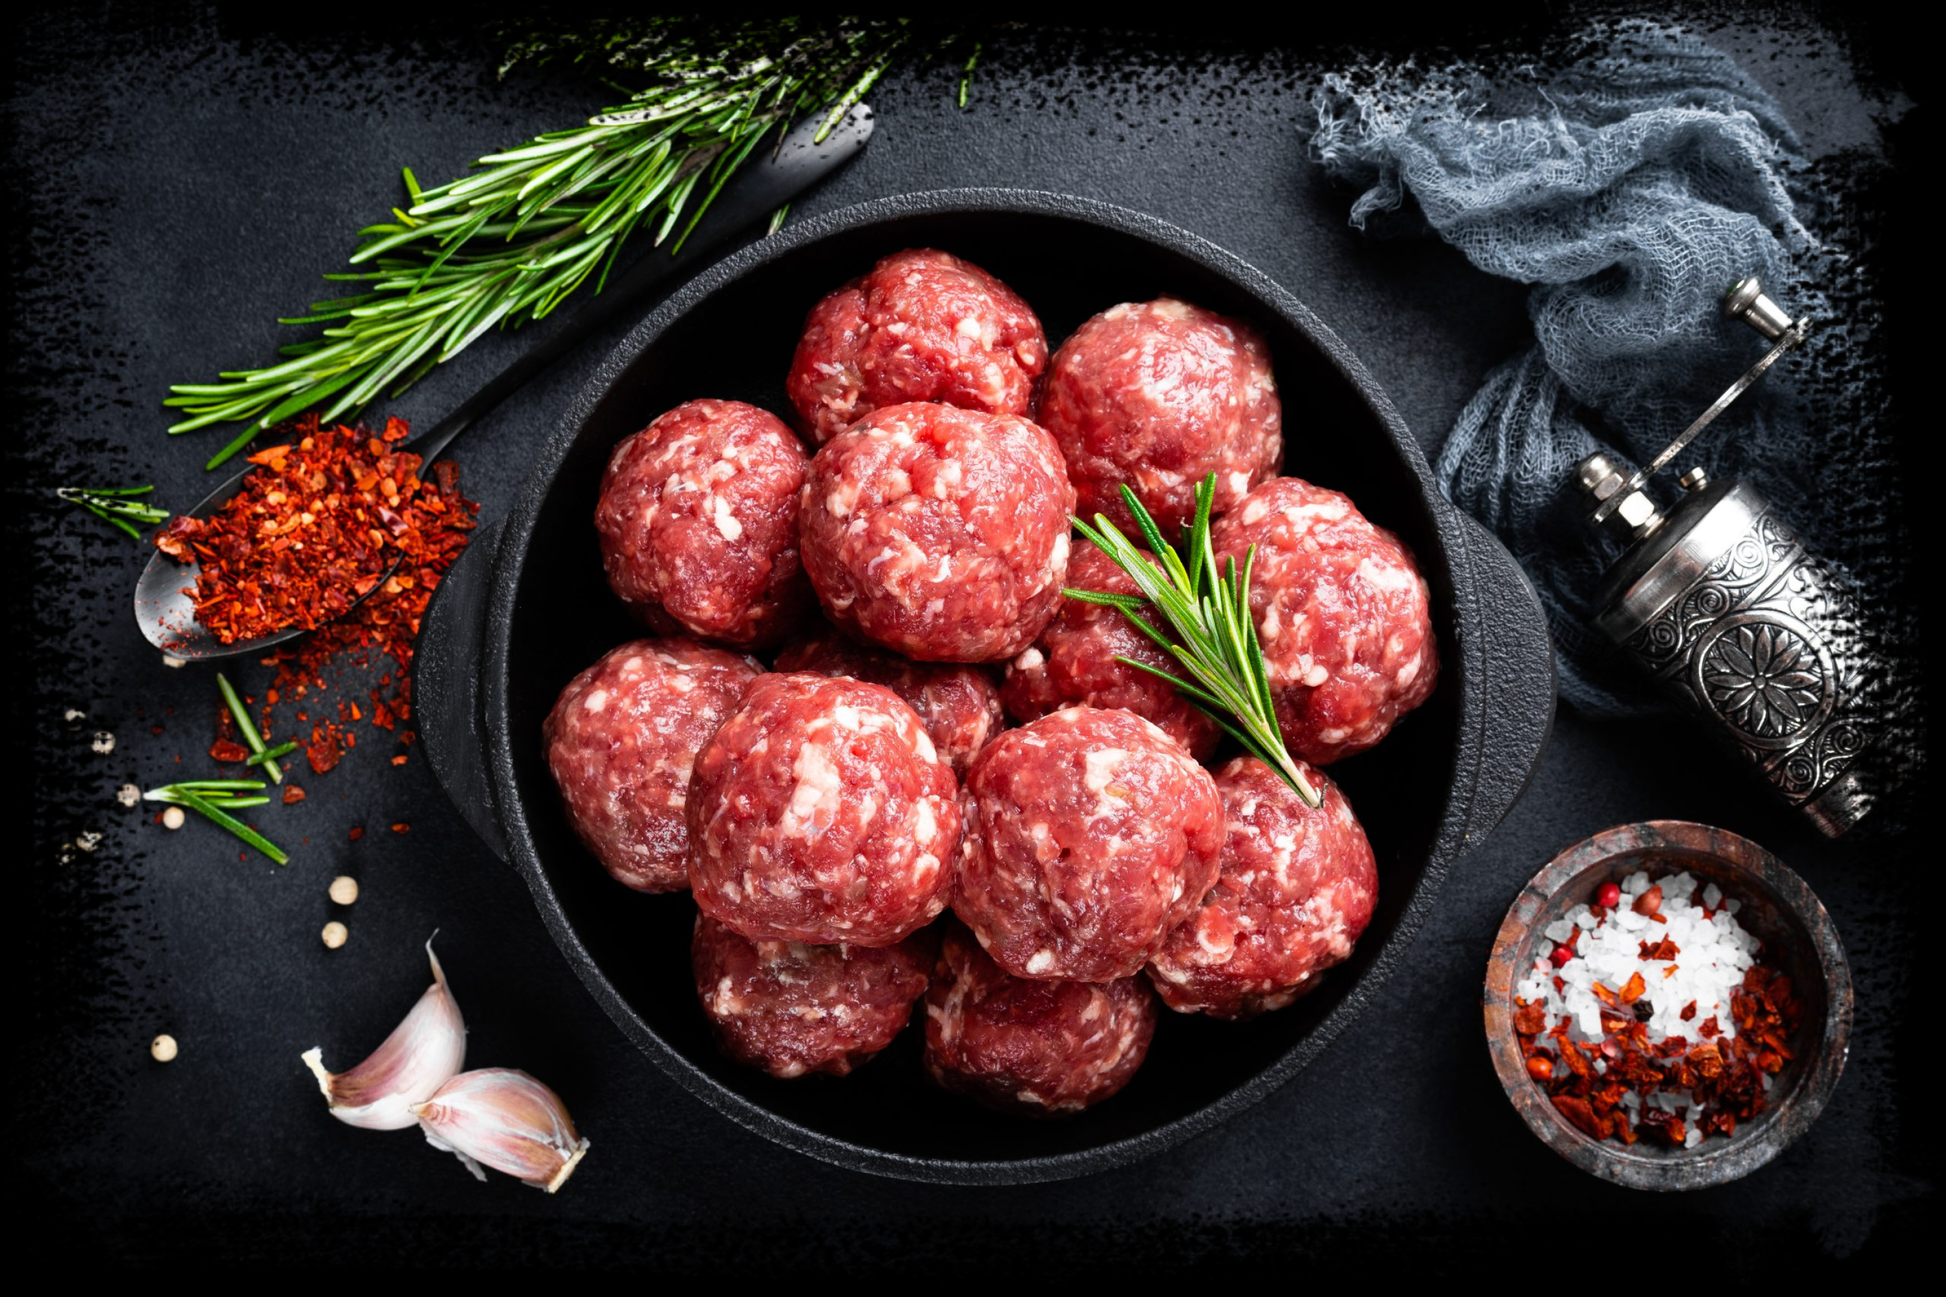 Grass-Fed Beef Meatballs, Australia (Dhs 49.90/kg) - Chilled